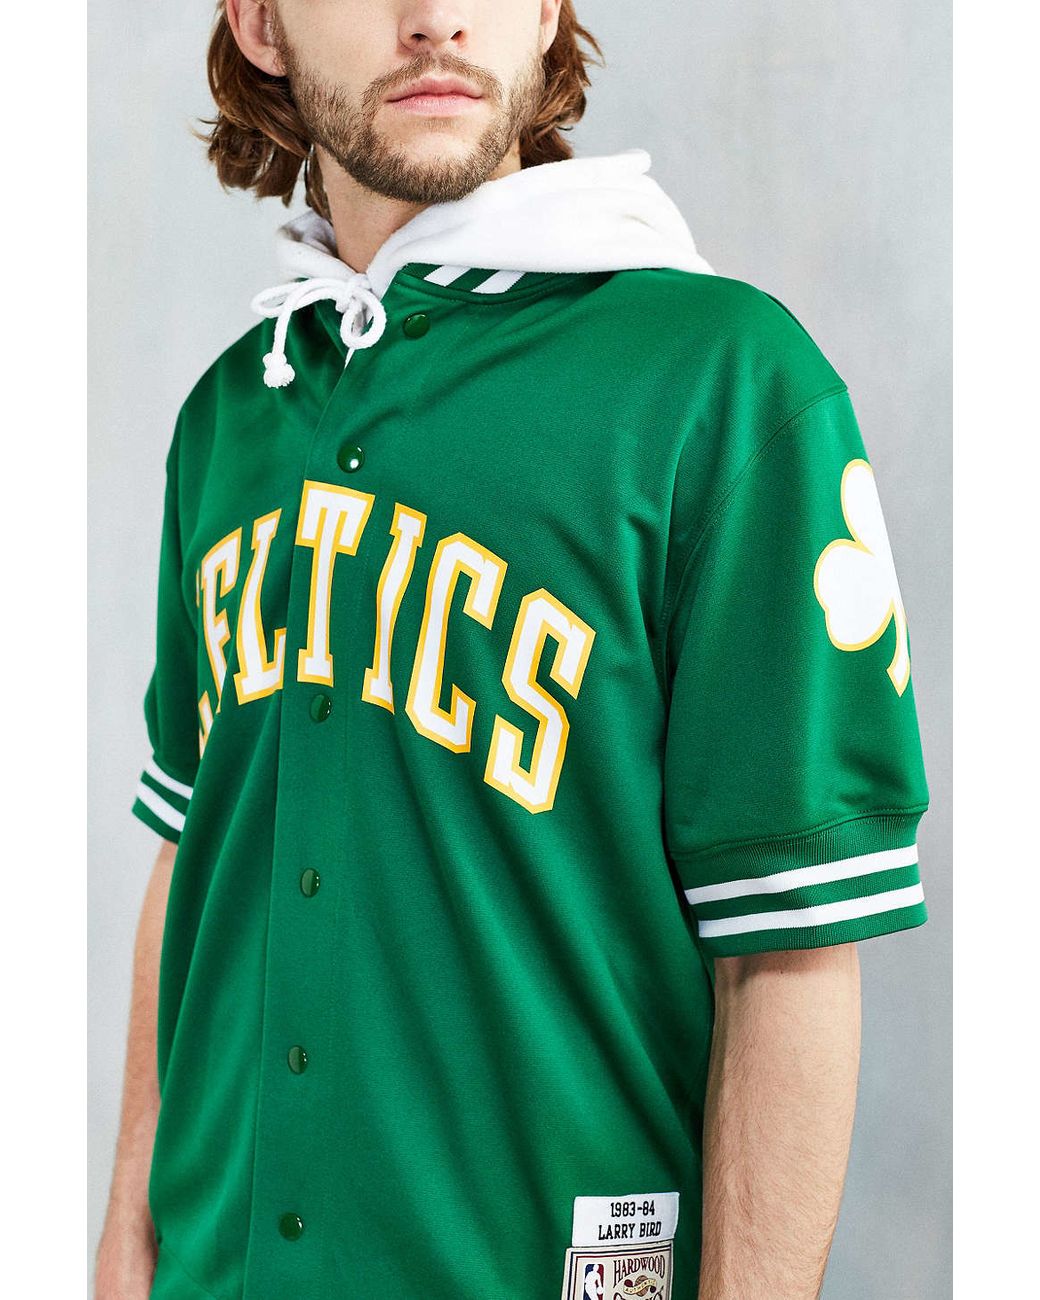 Mitchell & Ness 1984 Larry Bird Authentic Shooting Shirt Review